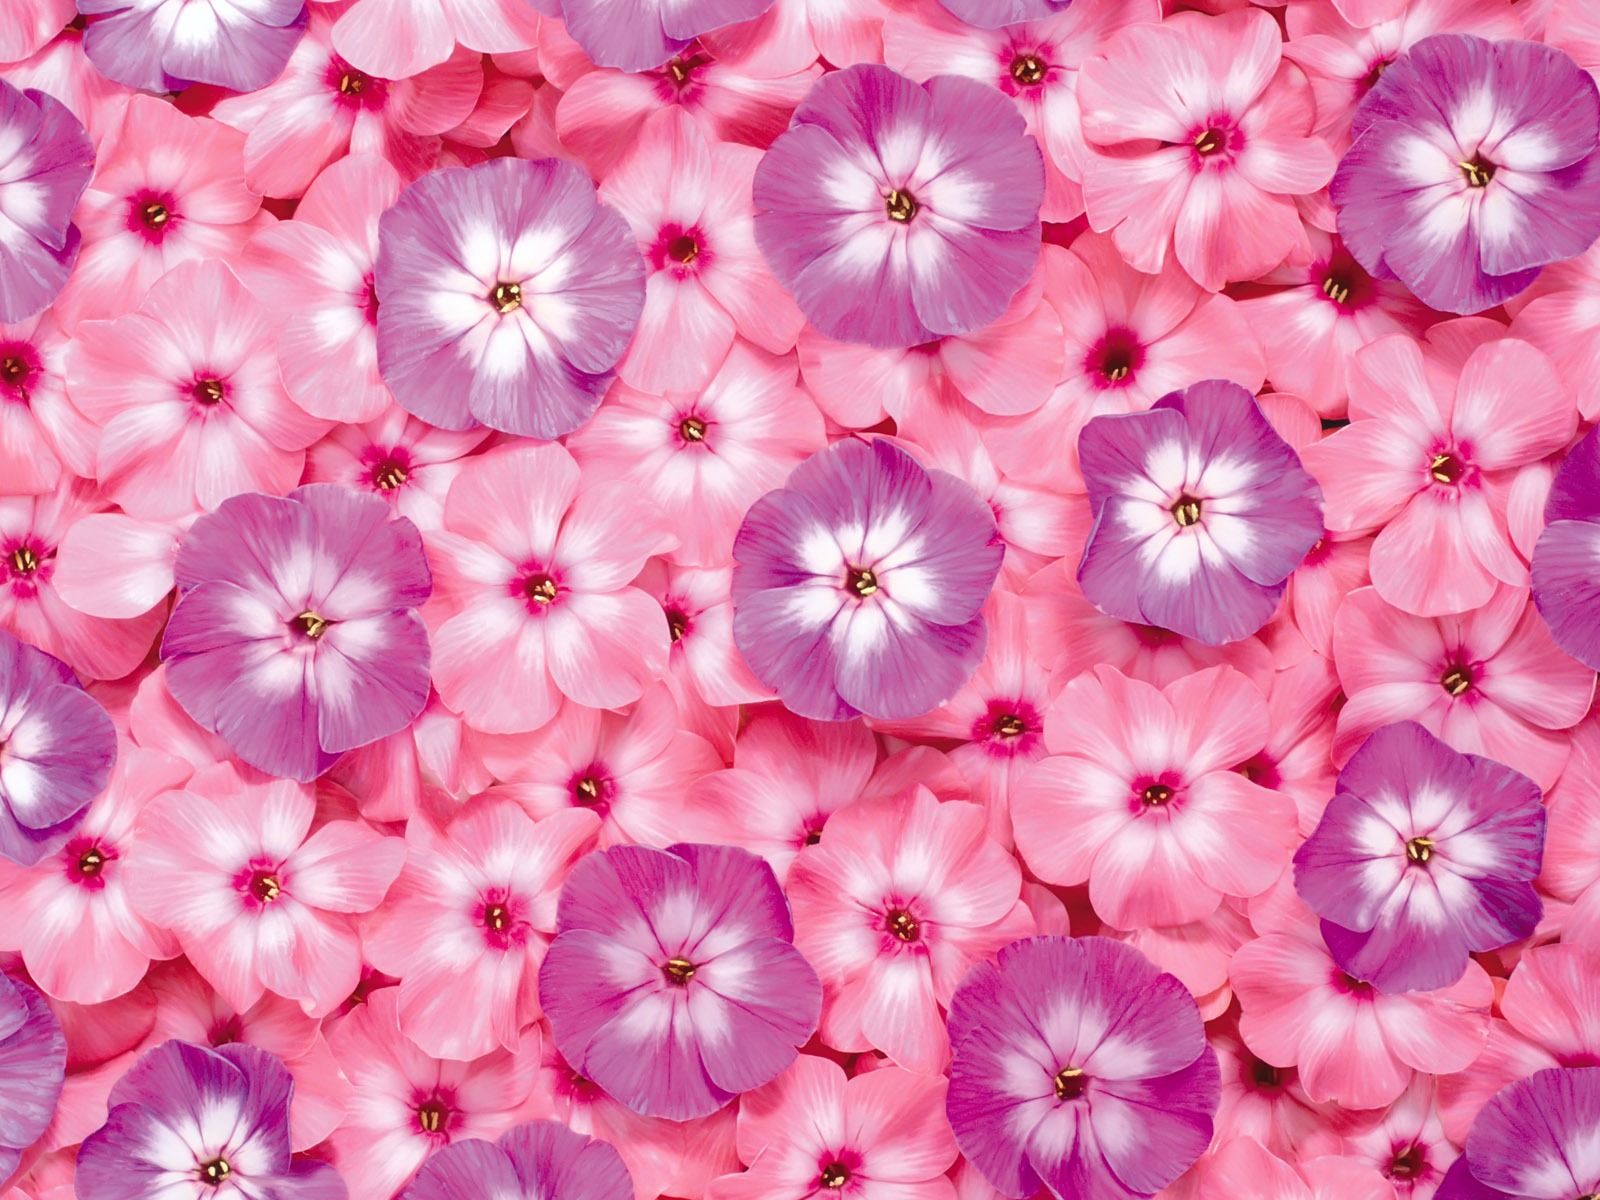 Surrounded by stunning flowers wallpaper #5 - 1600x1200